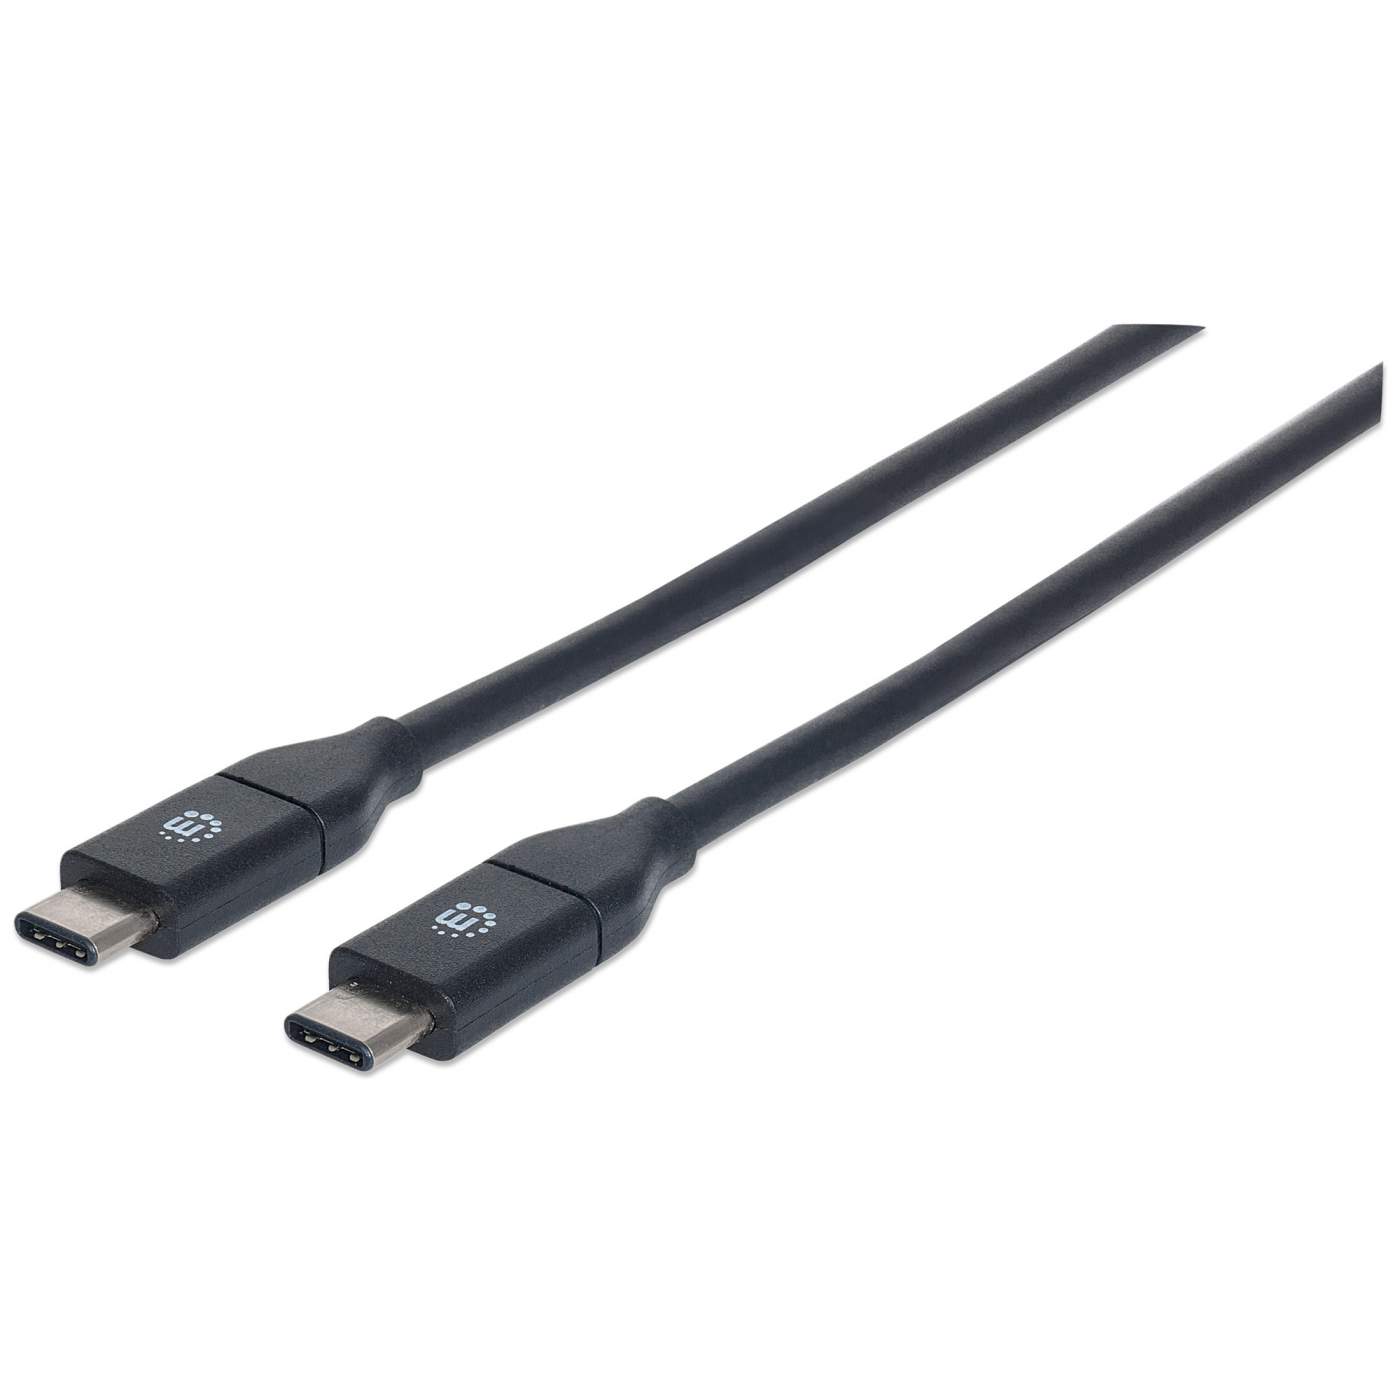 USB 3.2 Gen 2 Type-C Device Cable Image 1